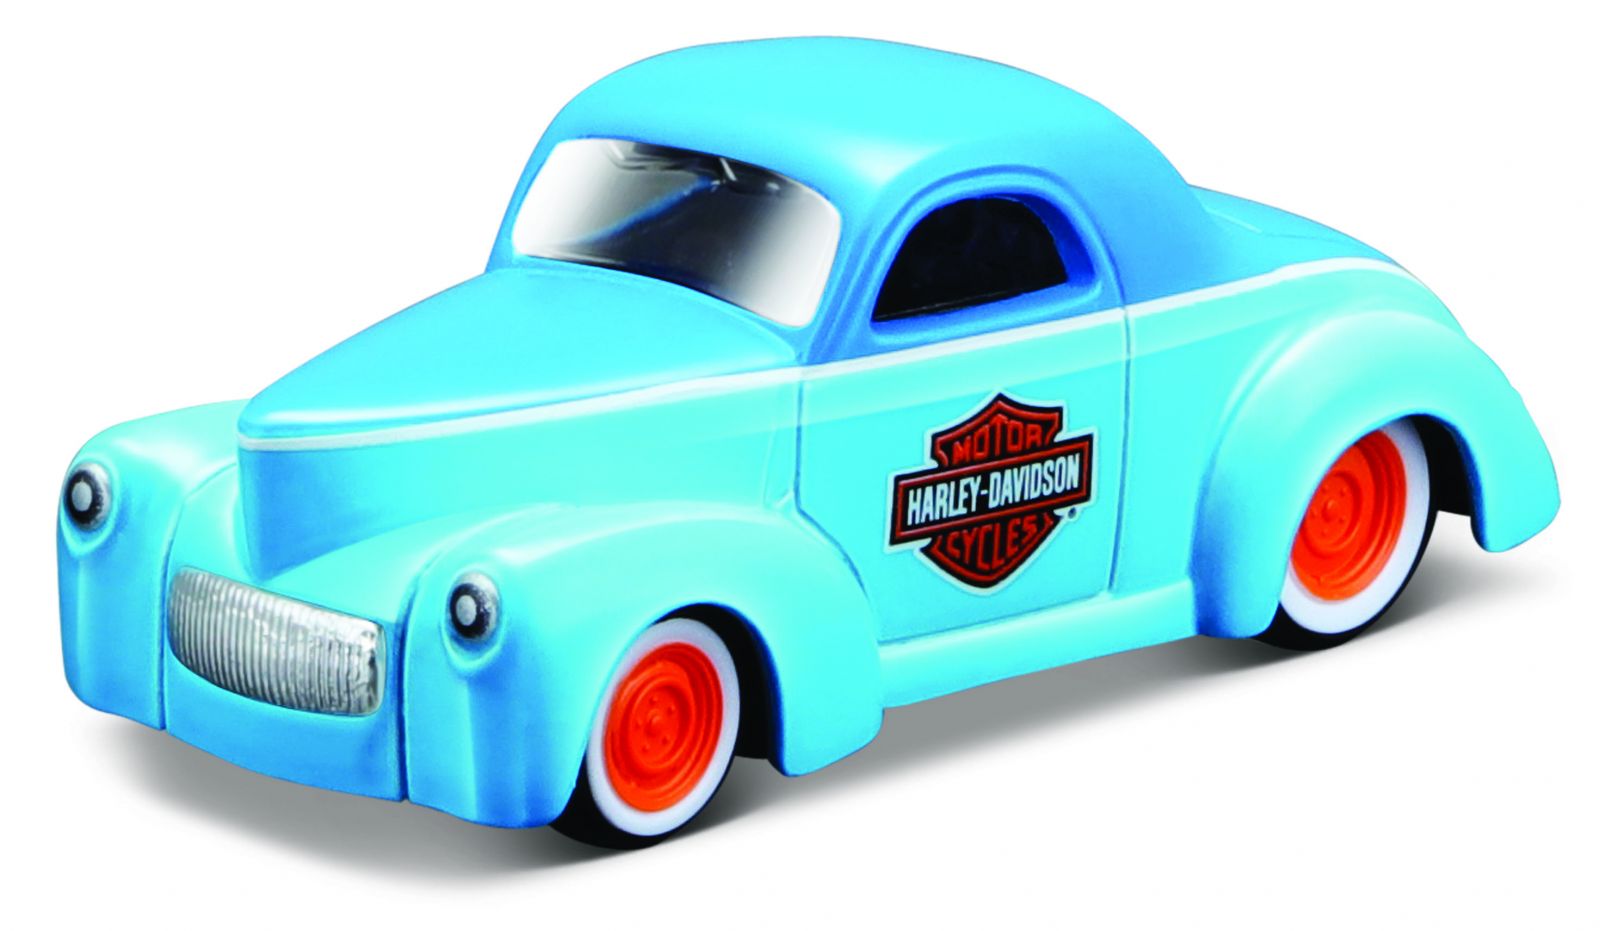 Maisto 1:64 15380 HD - Willys Coupe 1941